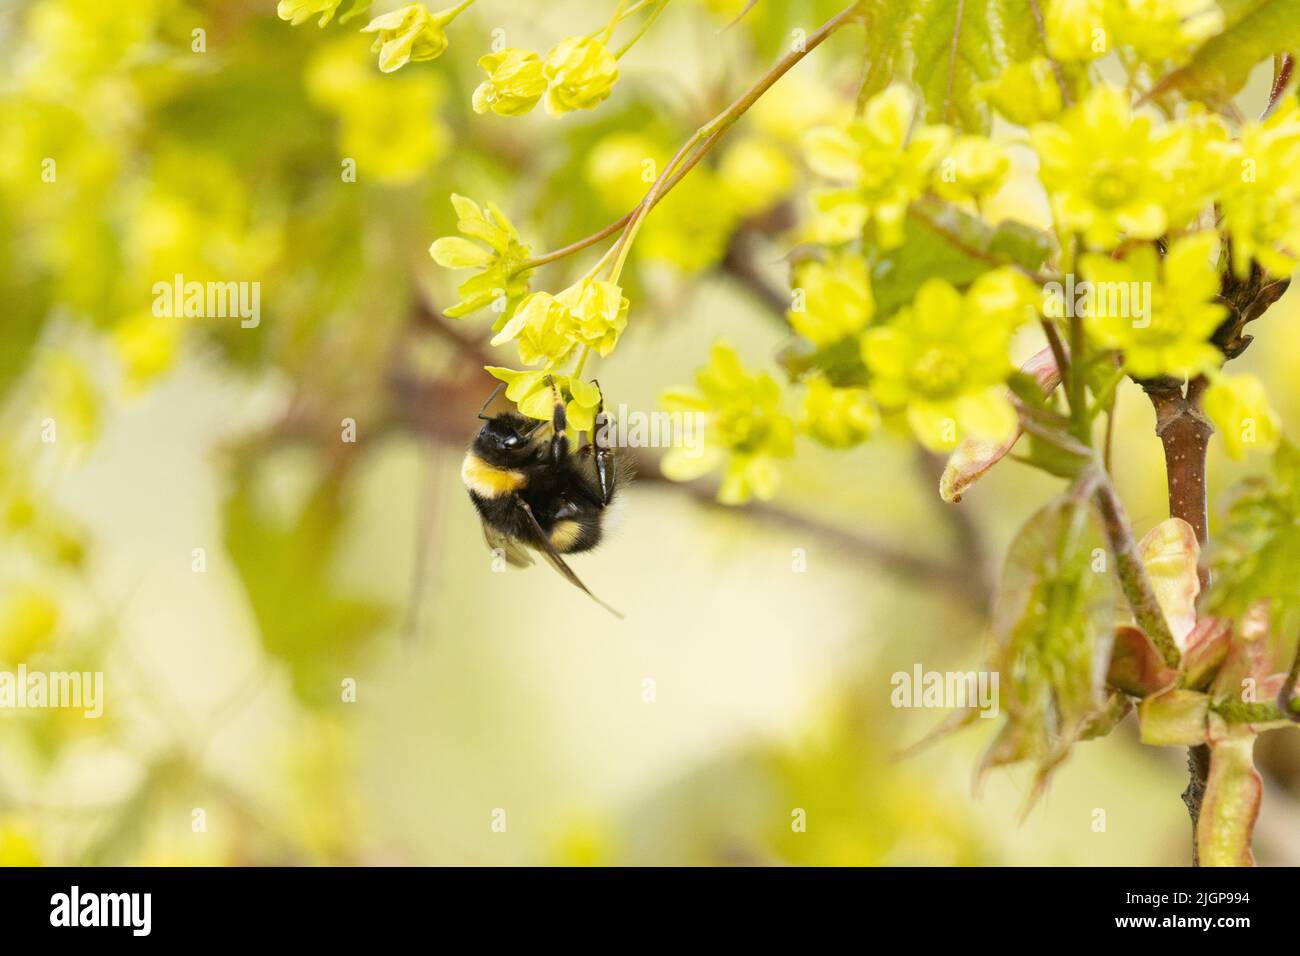 Bumblebee visiting fresh Norway maple blossoms on a spring day in Estonia, Northern Europe Stock Photo